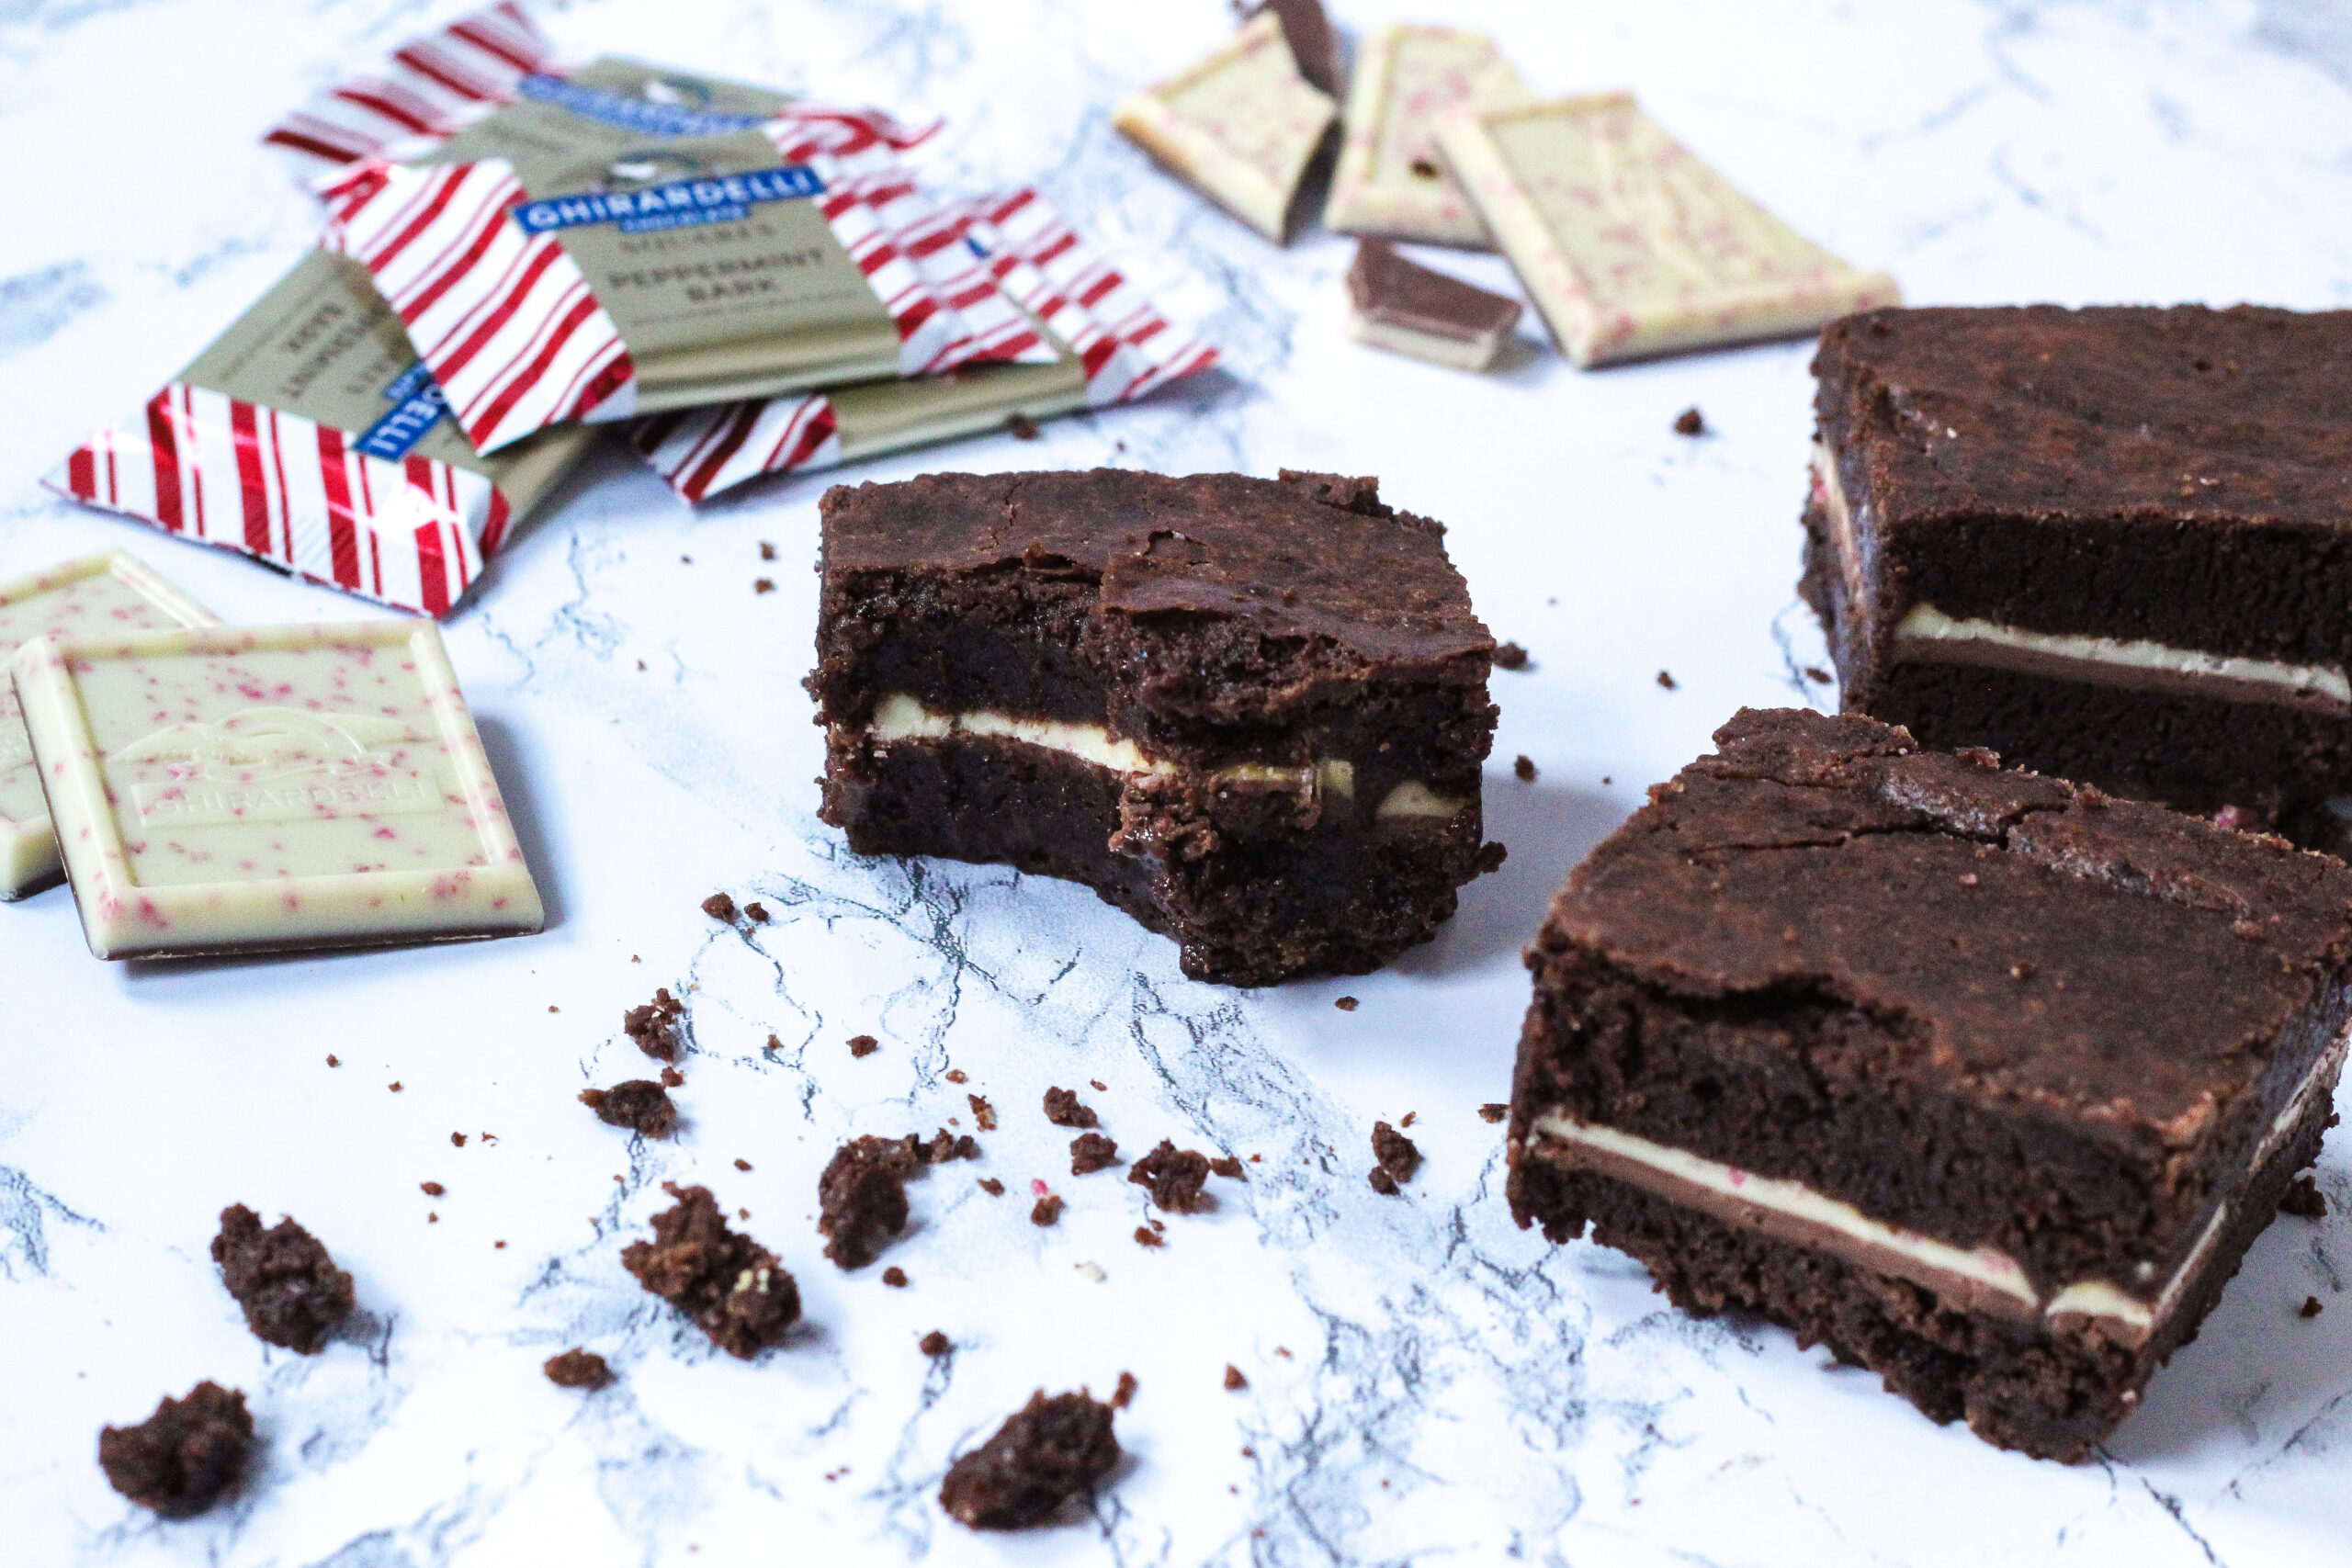 angled view, with a brownie with a bite taken out of it in the center of the frame. to the left of the brownie is whole, unwrapped peppermint bark squares, some wrapped peppermint bark squares in the top left corner. Top center, behind the brownie, is broken pieces of peppermint bark squares. Along the right side of the frame is two more brownies. In front of the bitten brownie at the bottom of the frame is a bunch of brownie crumbs.